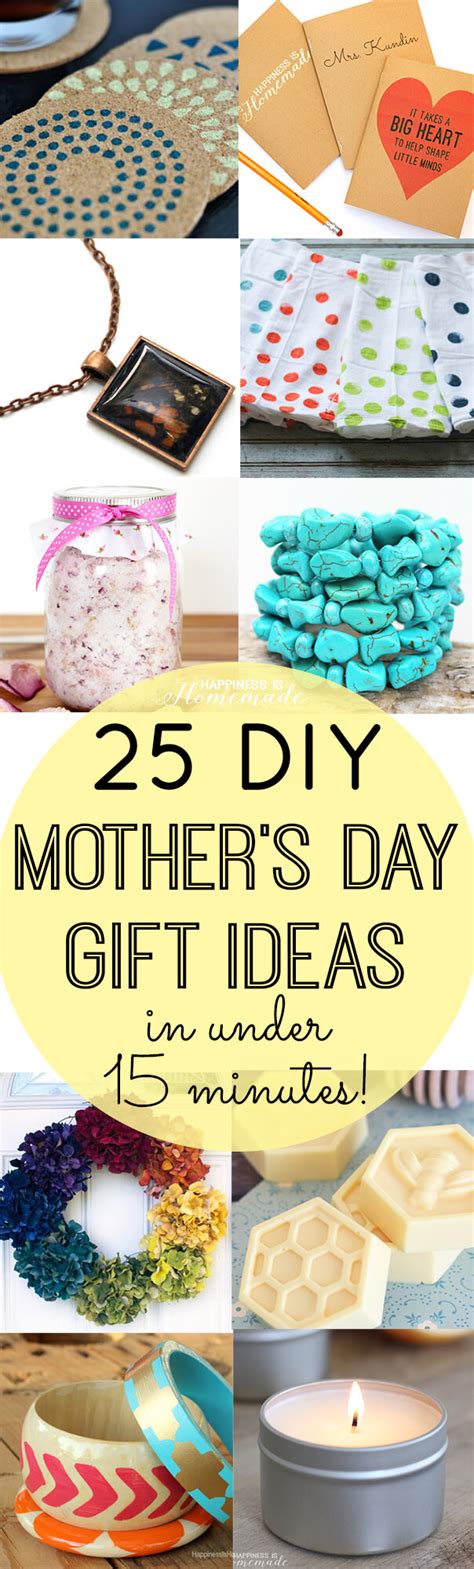 Easy, affordable, and from the heart. DIY Mother's Day Gifts in Under 15 Minutes! - Happiness is ...